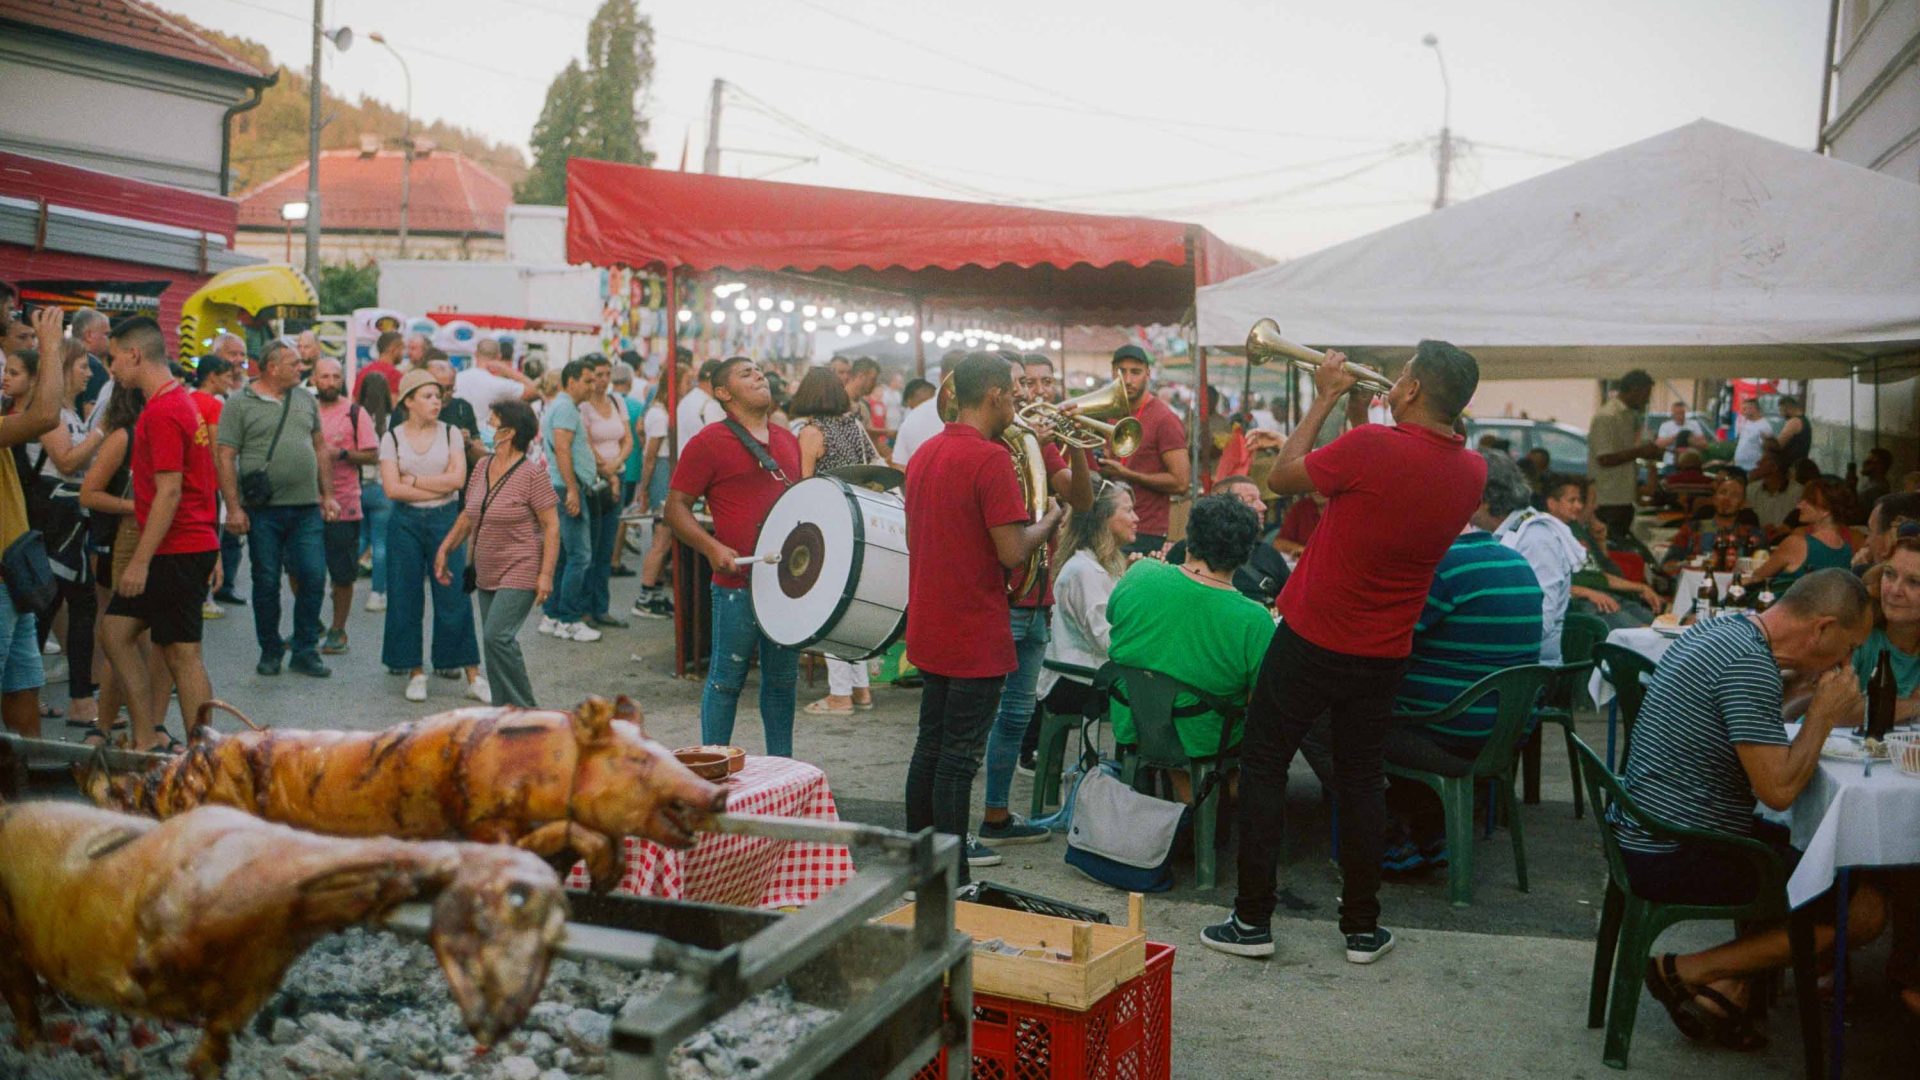 Festivities in the city of Guca. Pigs are roasting, musicians are in the street playing music and people are milling round stalls.